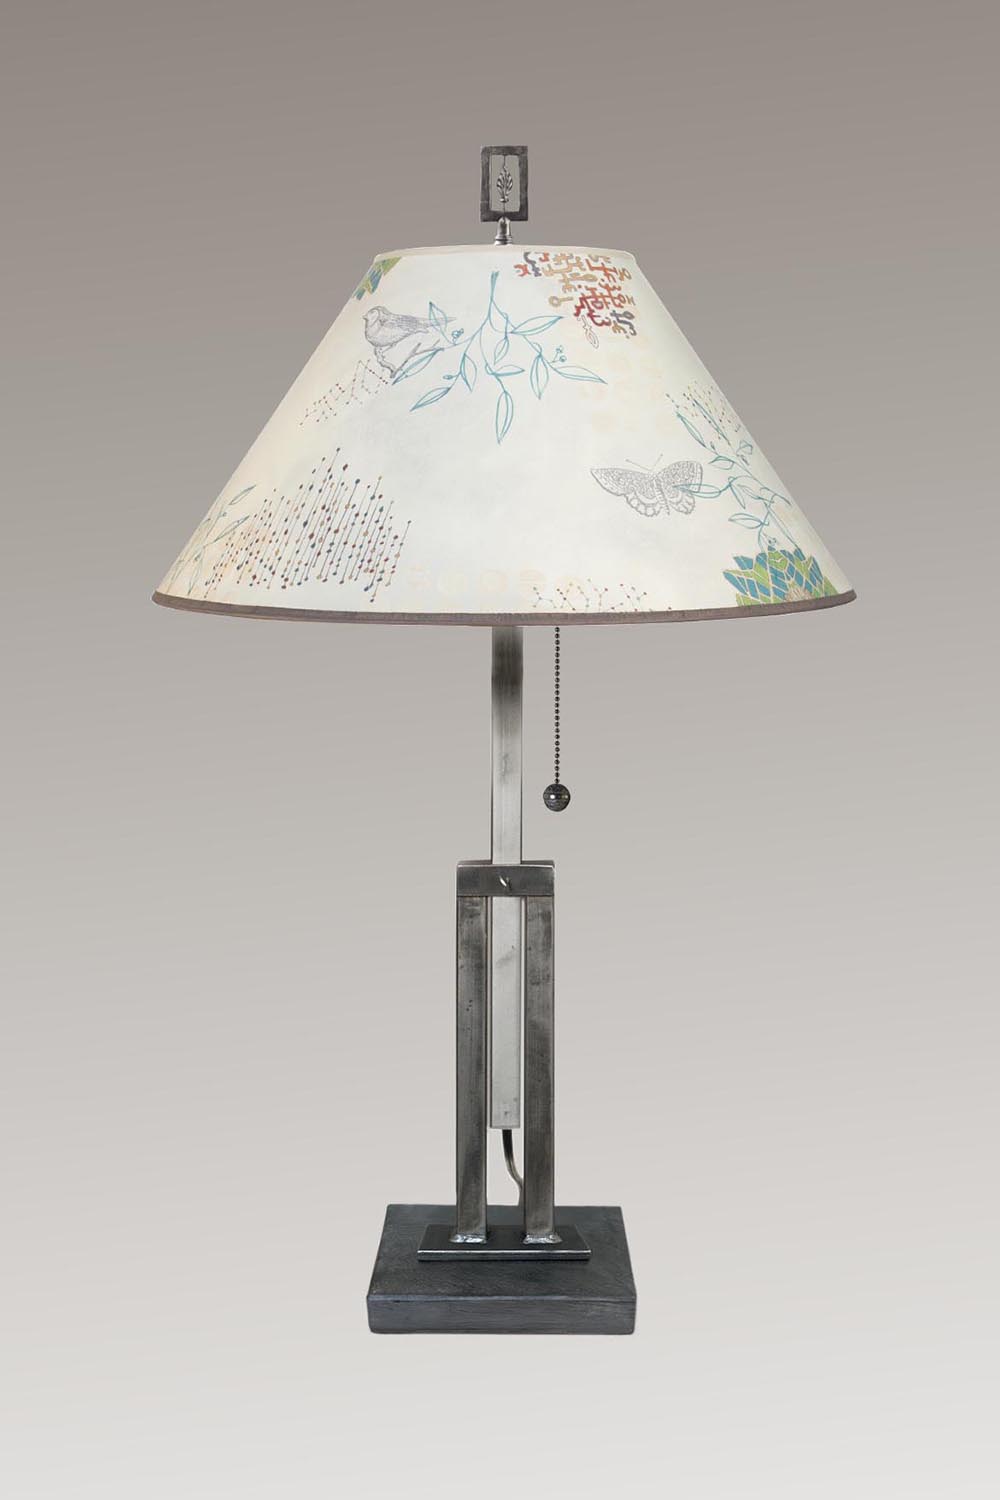 Janna Ugone & Co Table Lamps Adjustable-Height Steel Table Lamp with Large Conical Shade in Ecru Journey